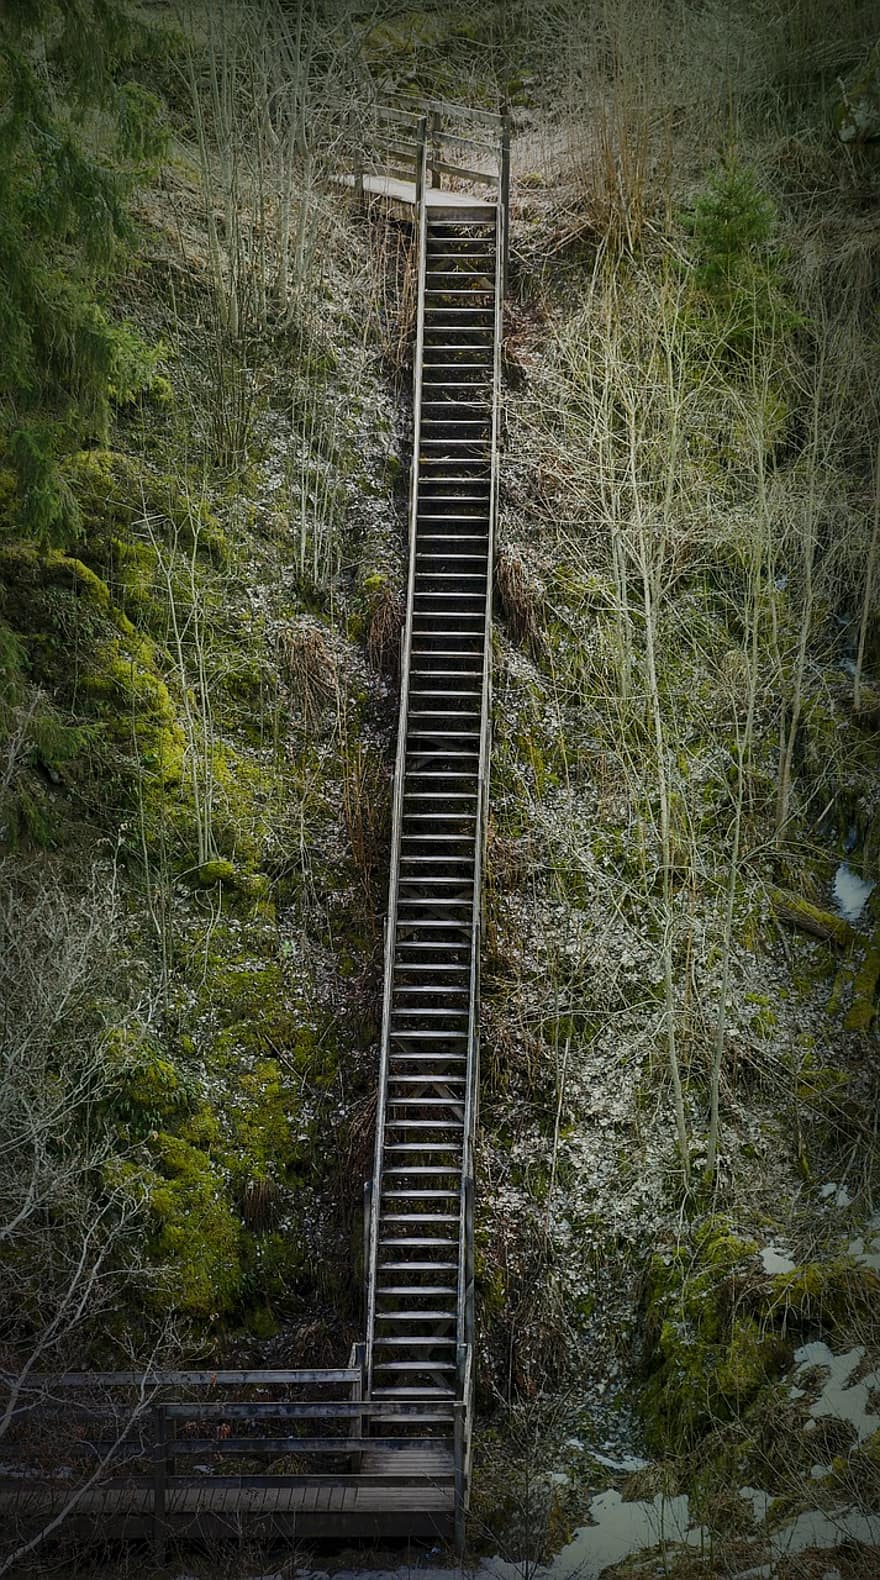 Staircase, Stairs, Forest, Trees, Steep Slope, wood, footpath, tree, steps, rural scene, green color